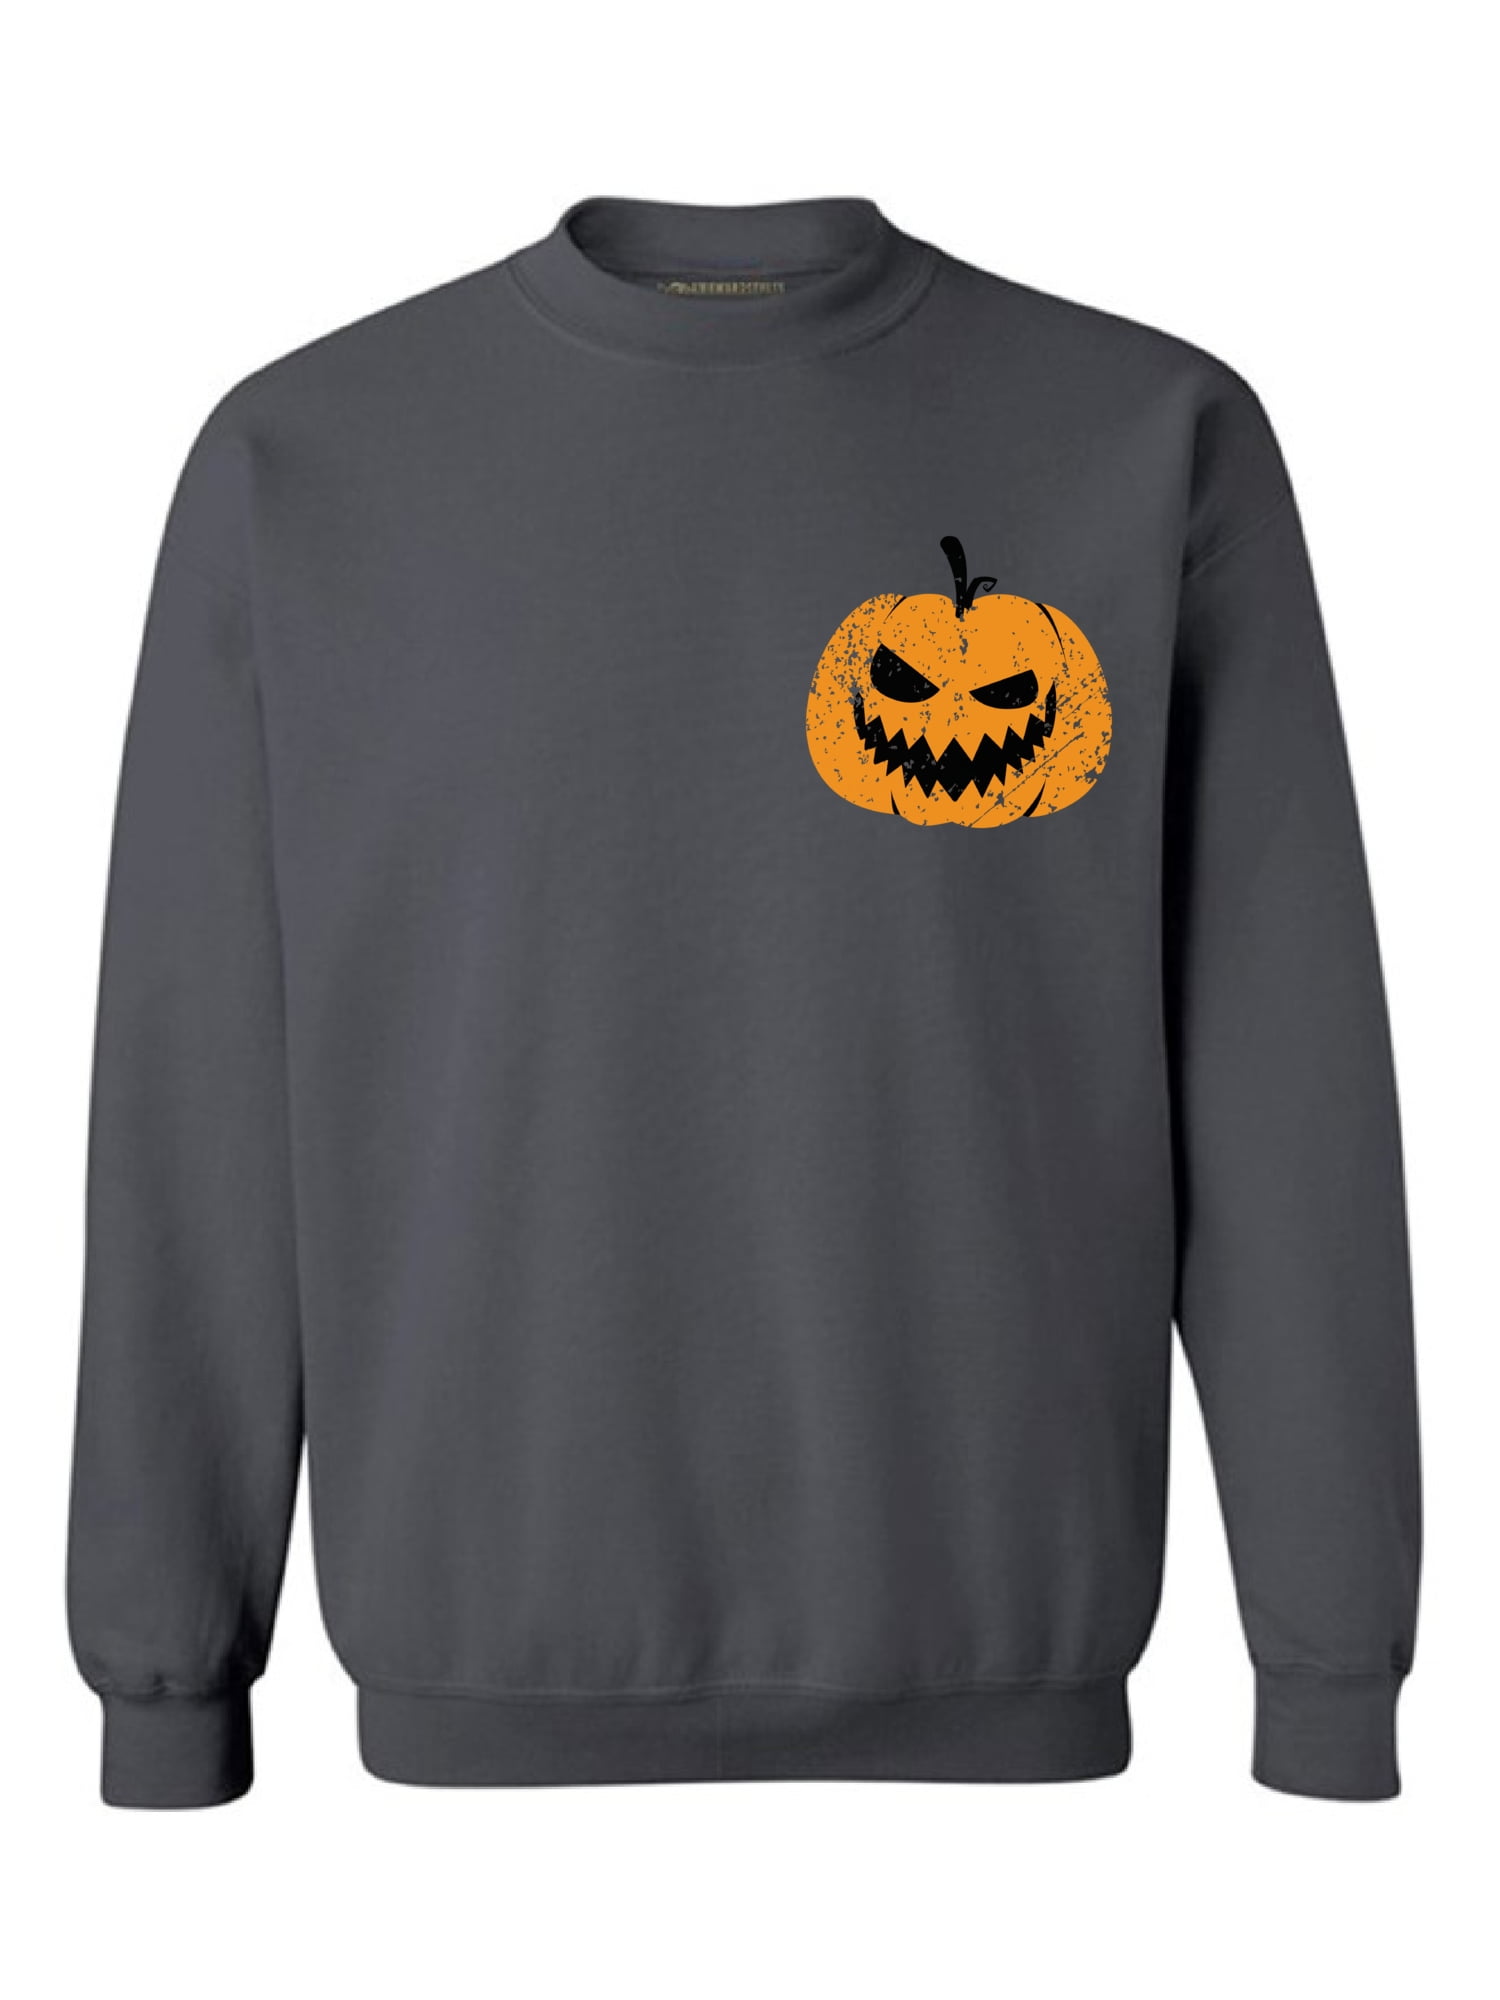 Getting Candy Wasted Hallloween Trick Treat Hoodies for Men Dark Gray